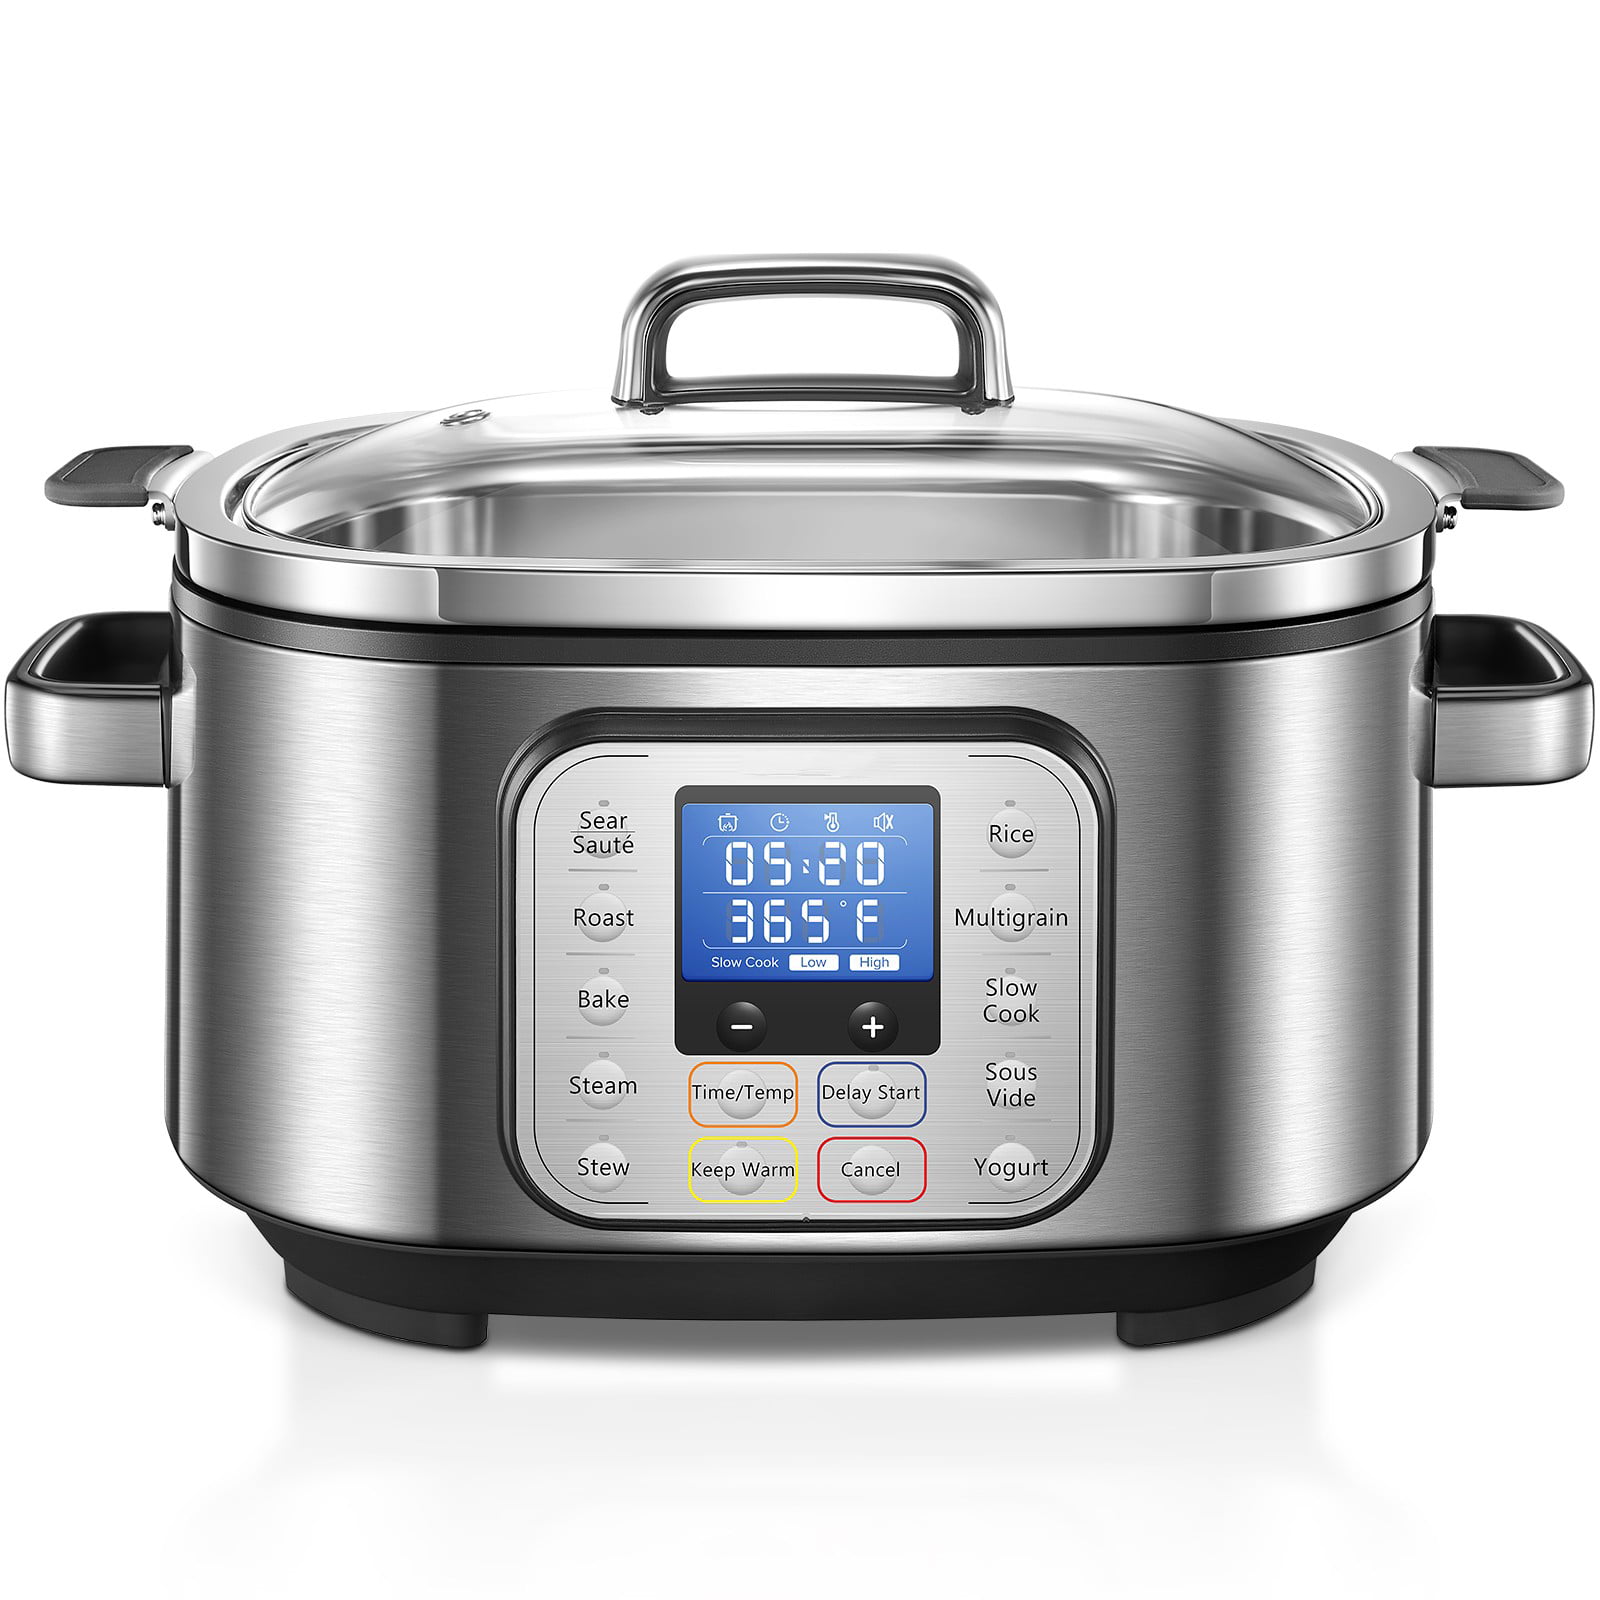 AICOOK HOUSNAT 10-in-1 6 Quart Programmable Slow Cooker with Digital Time